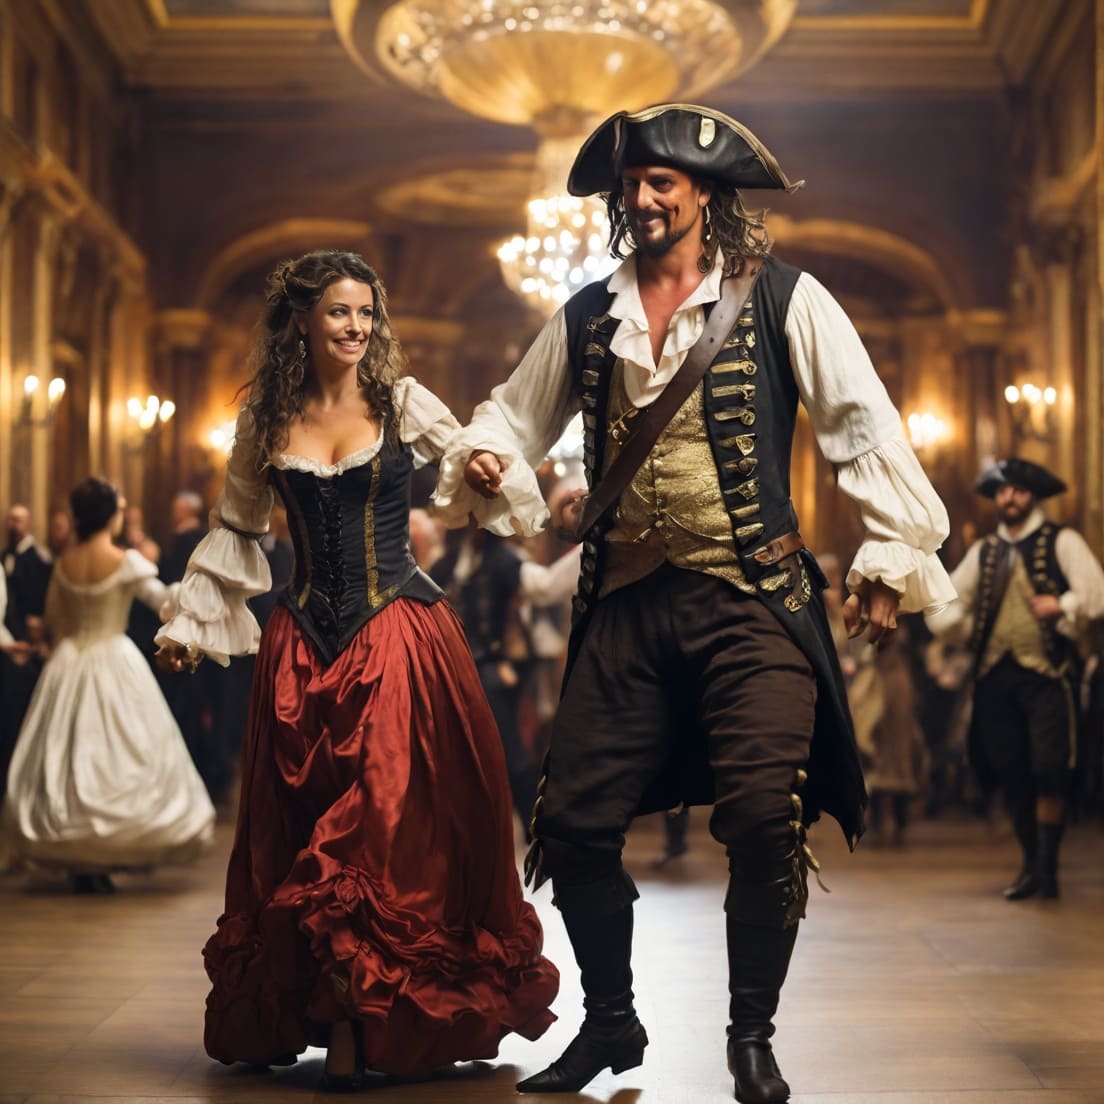 pirates, ball, palace, retro, ladies, dancing preview image.